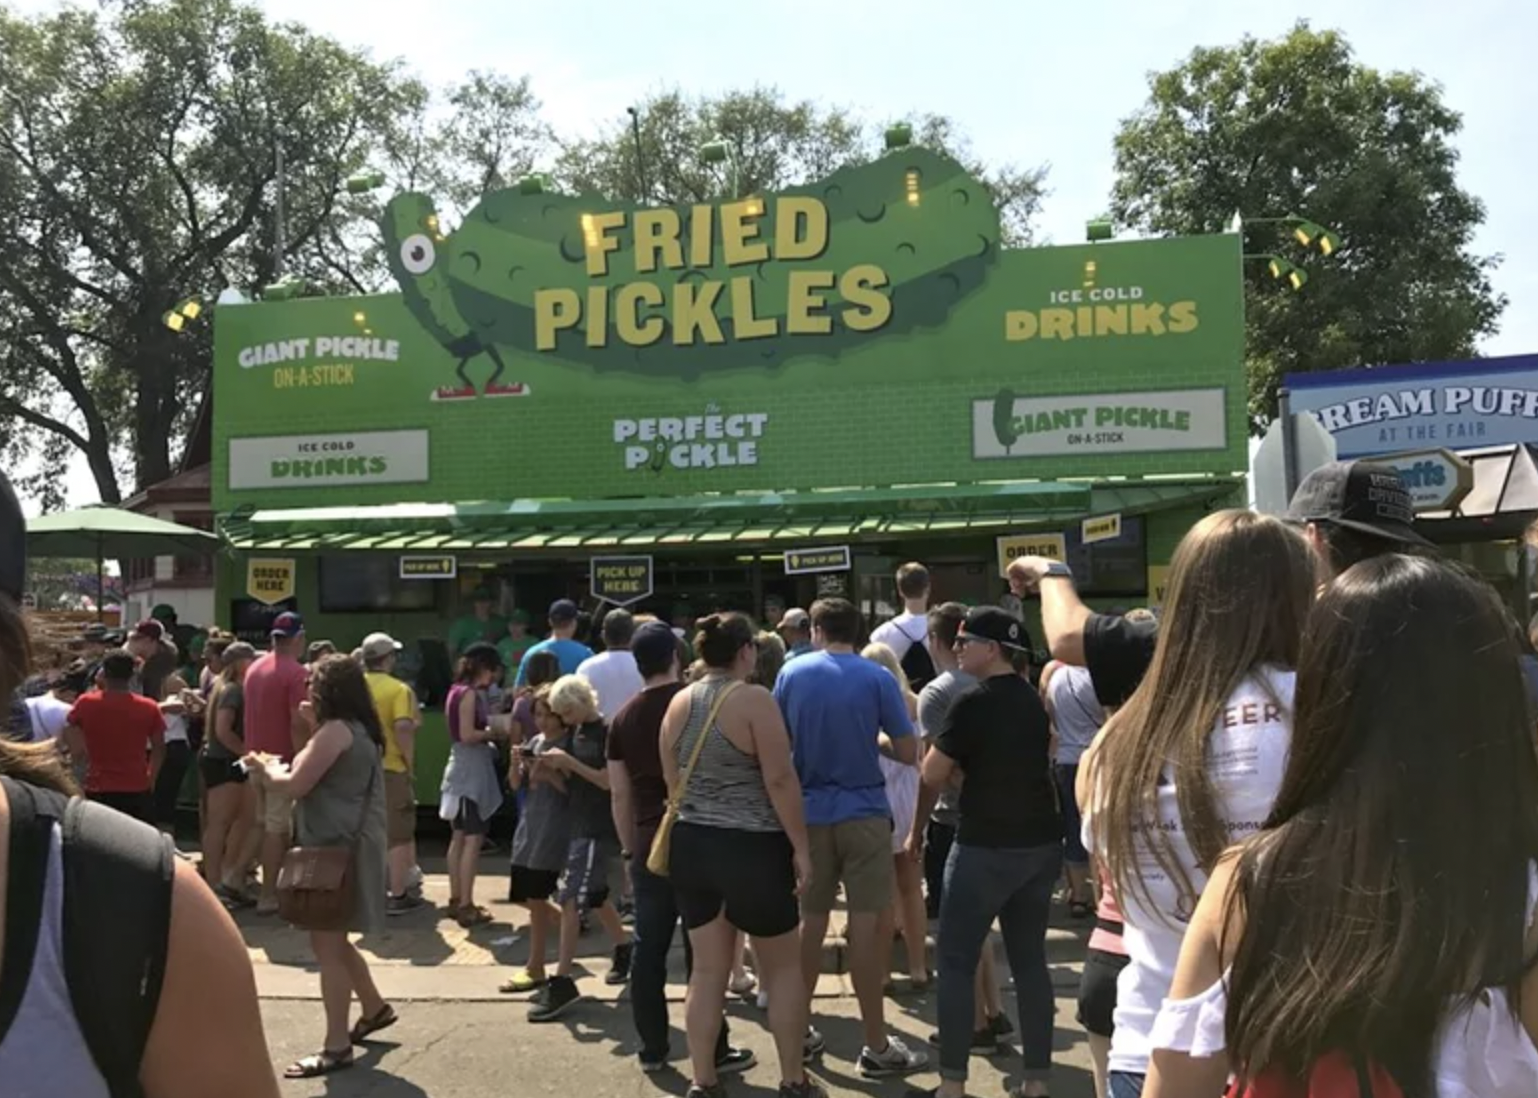 crowd - Giant Pickle OnA Stick Drinks Fried Pickles Perfect Pockle Ice Cold Drinks Ciant Pickle Am A Stron Ream Puff At The Fair Pick Up Eer